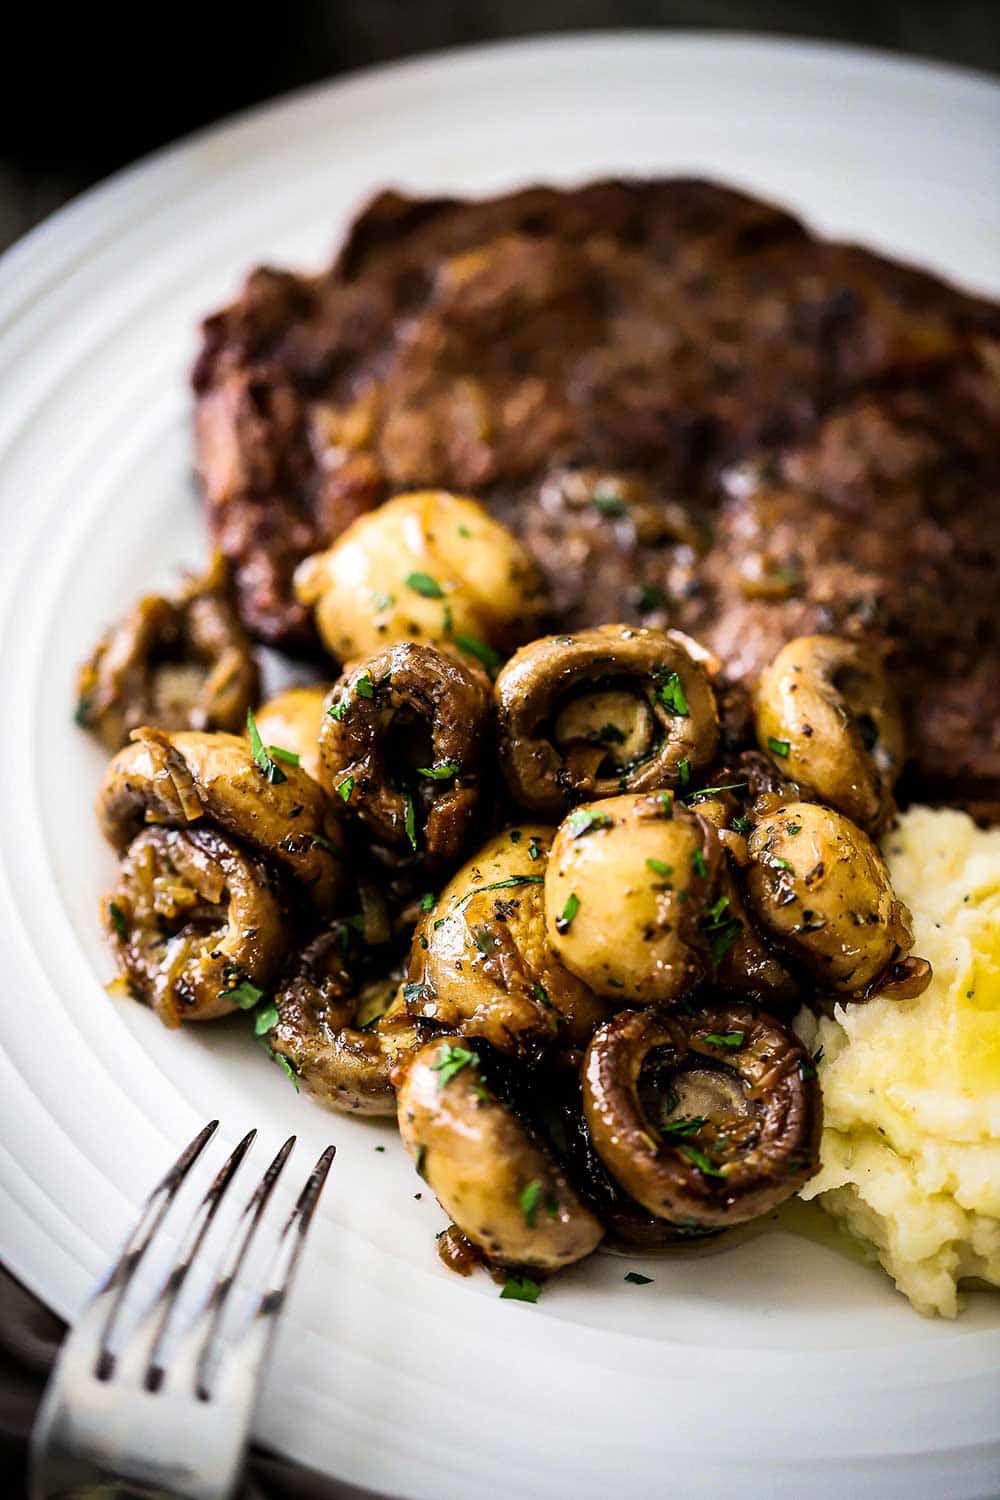 A white dinner plate filled with a grilled steak sitting next to a pile of sautéed whole mushrooms.